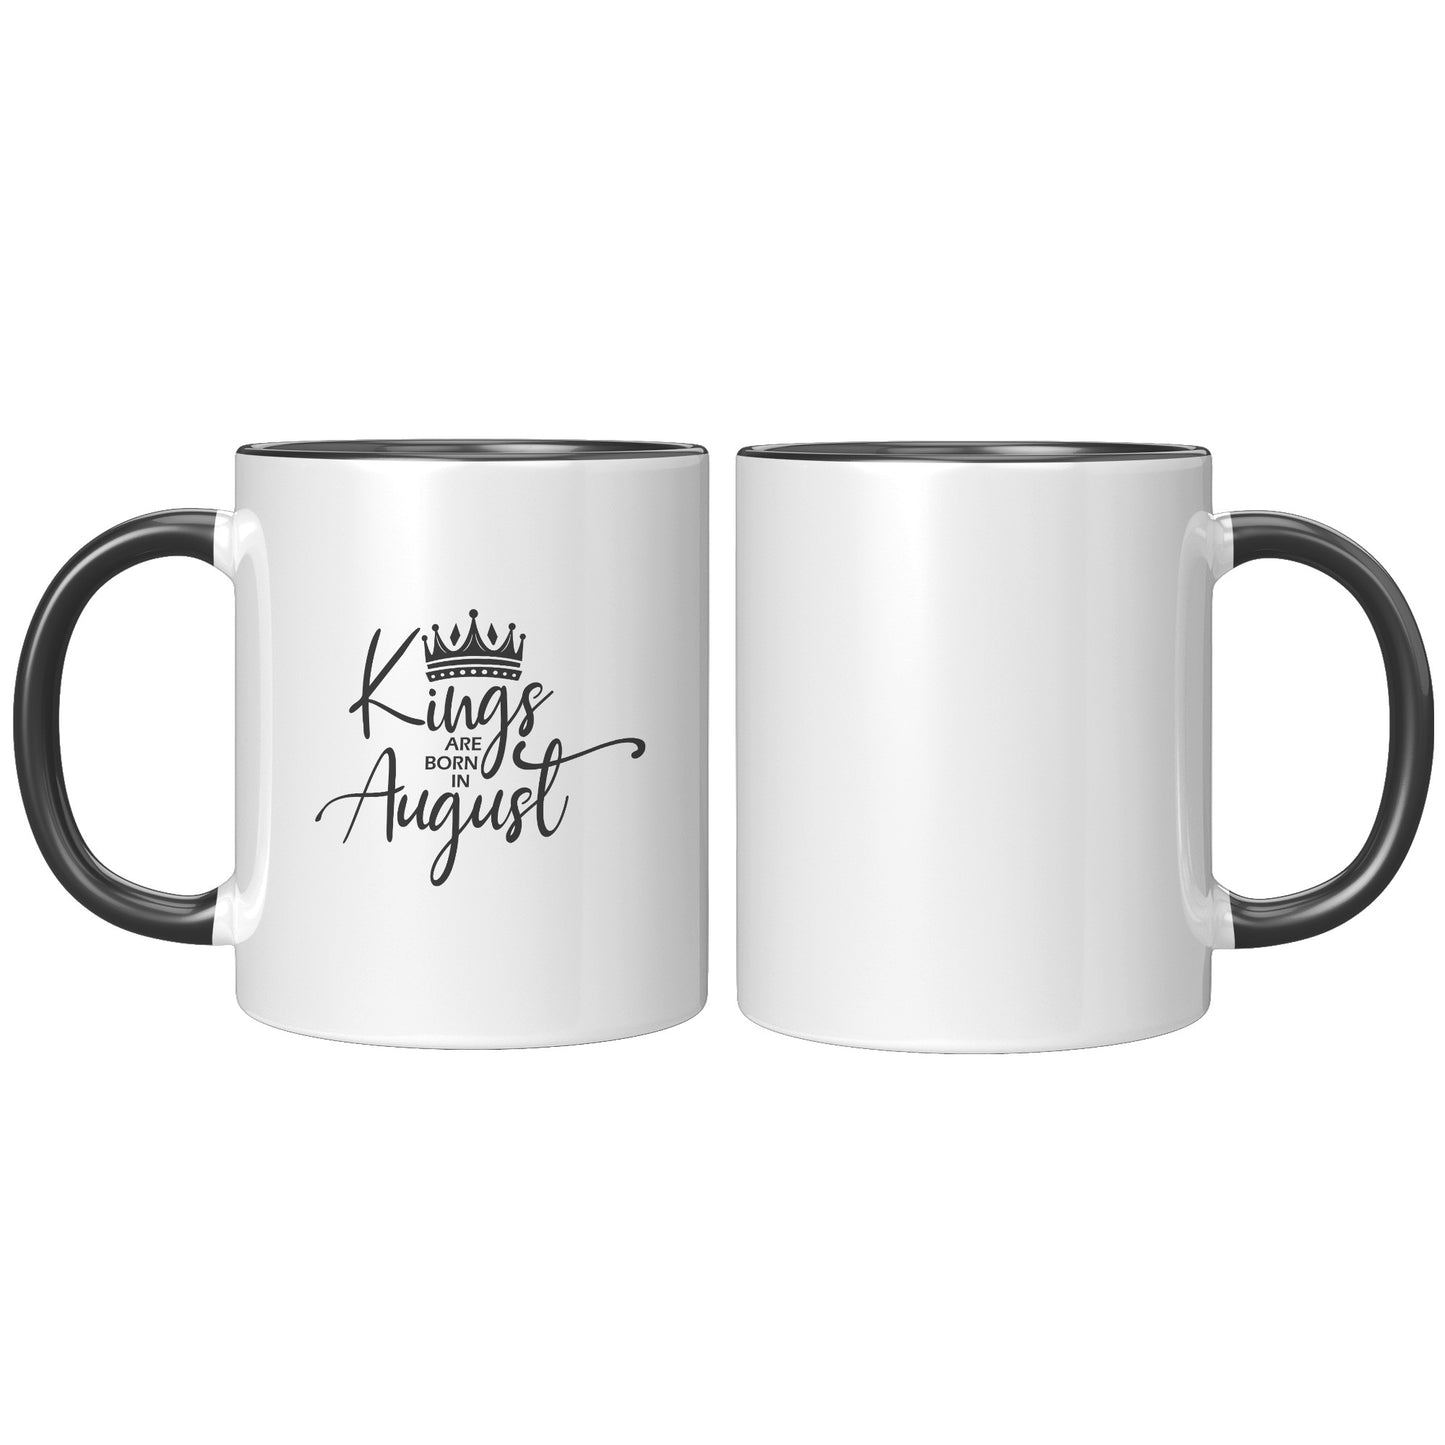 Kings are Born in August Mug